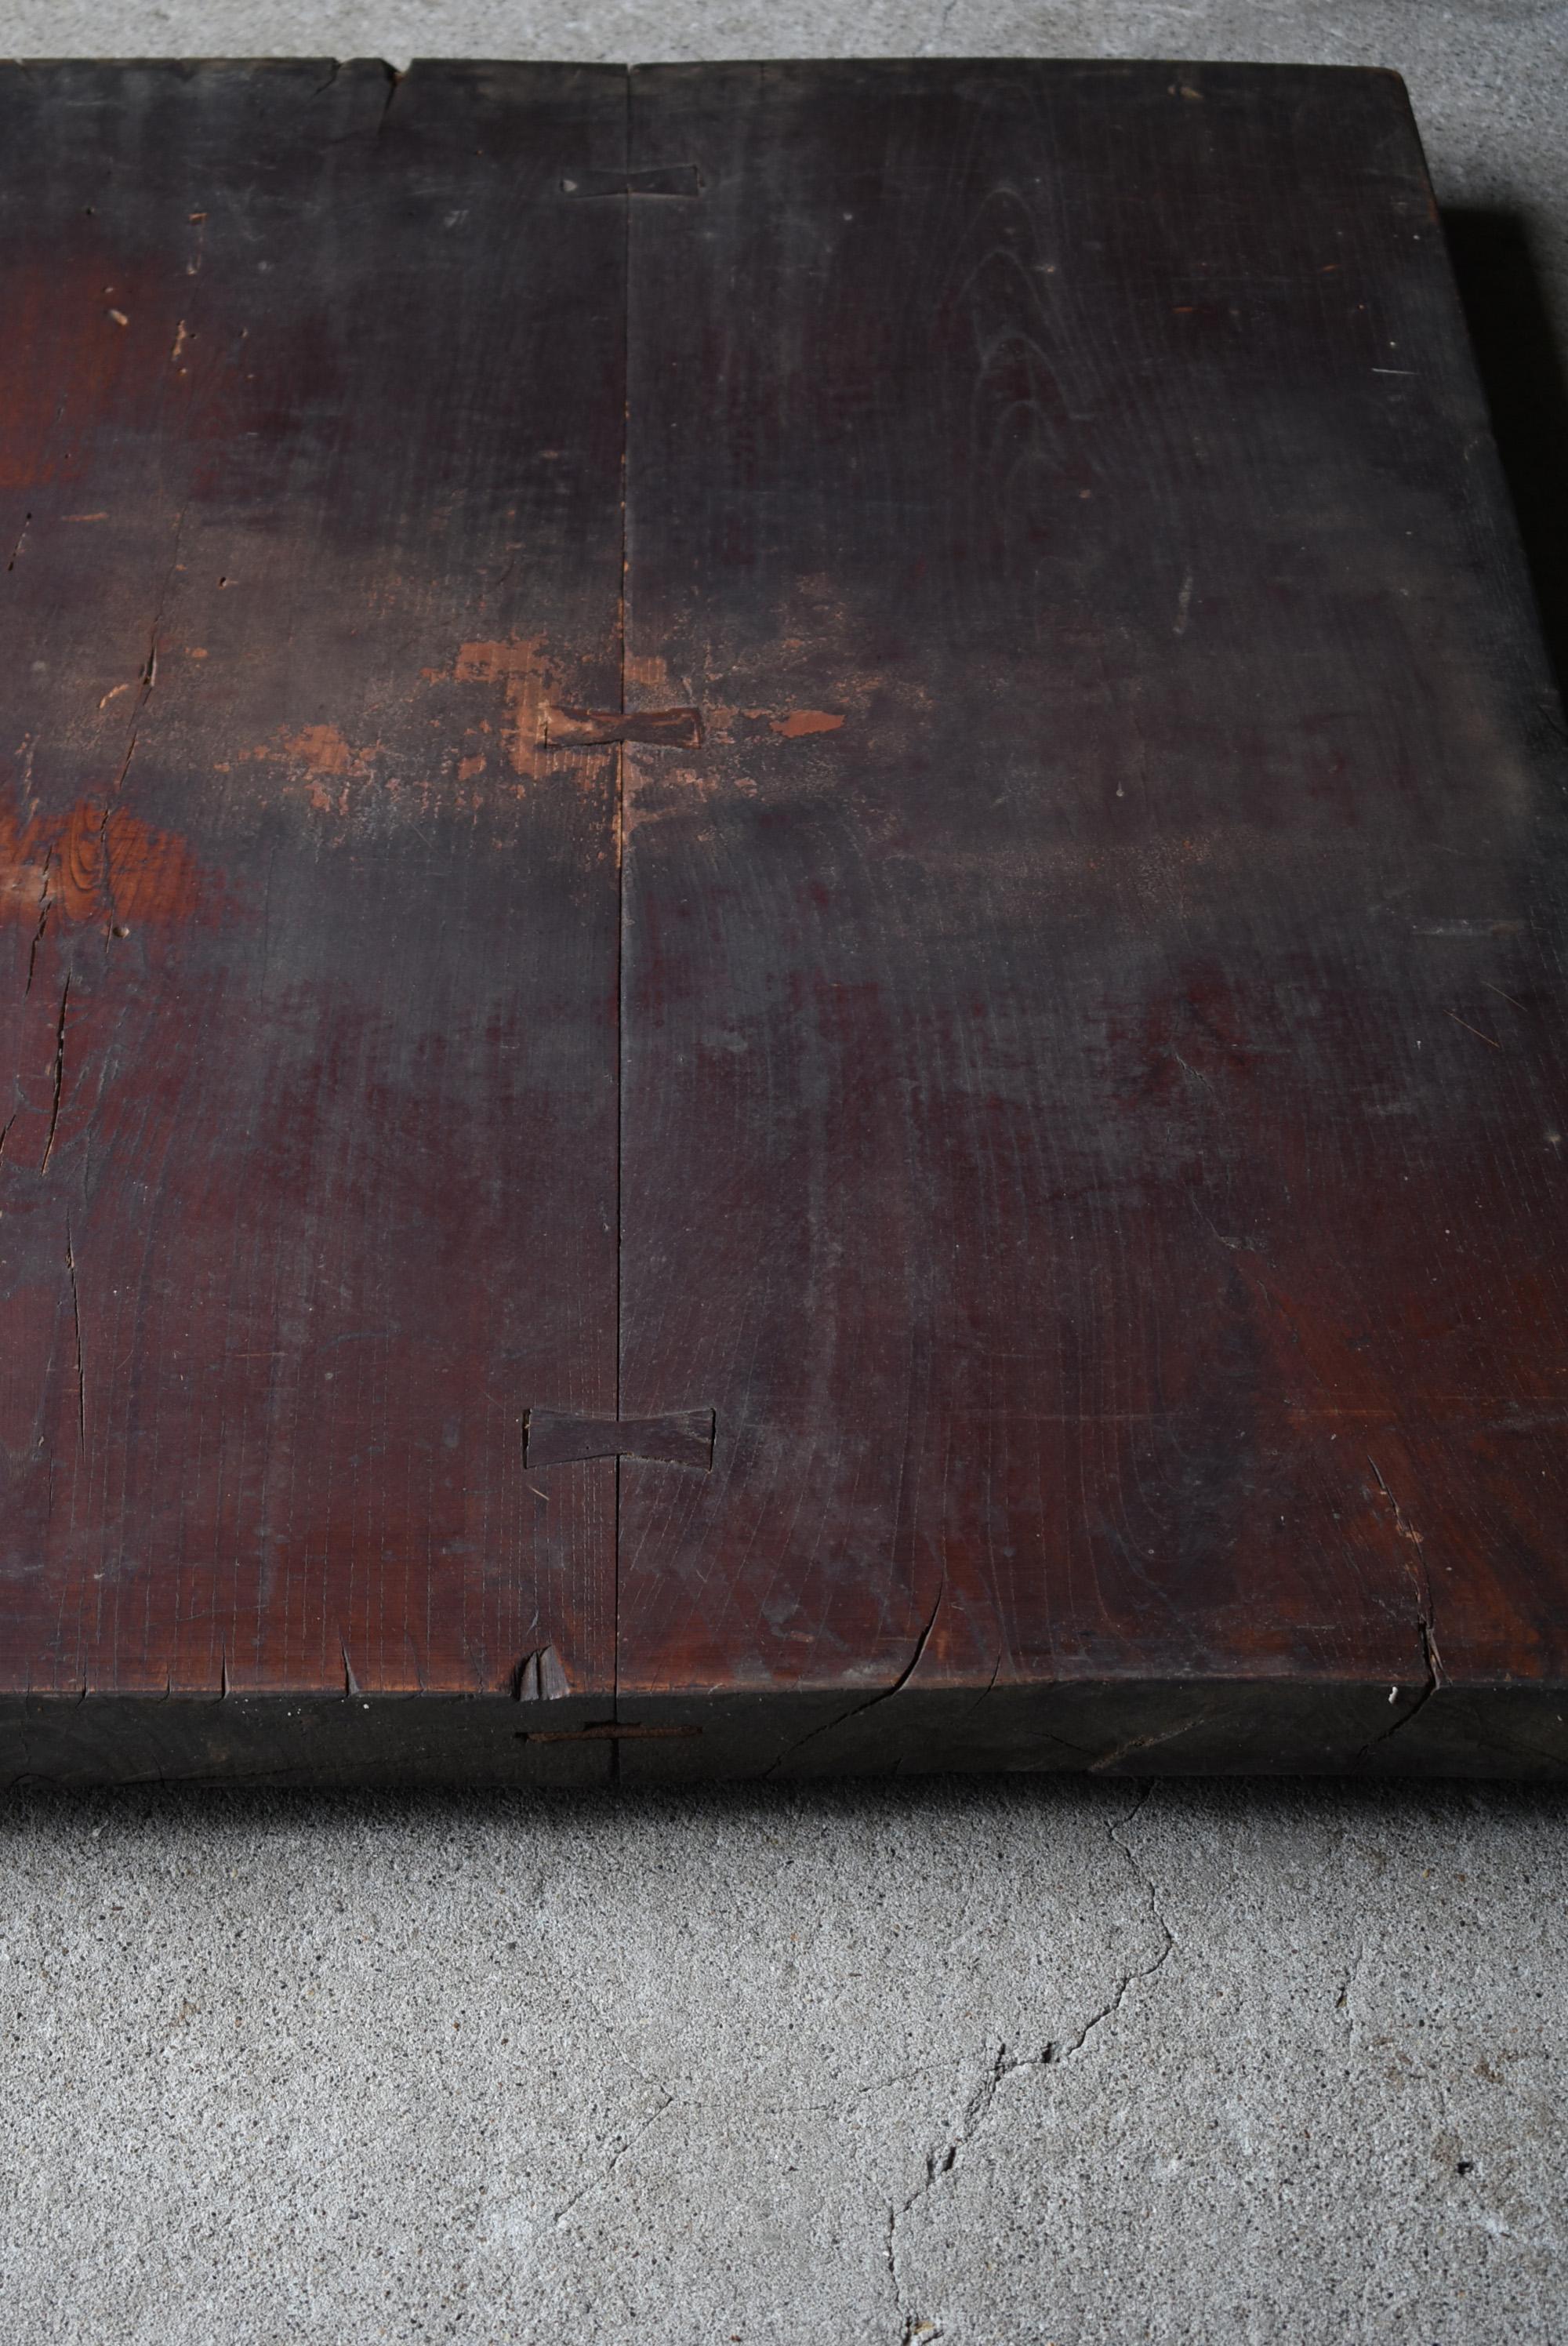 Edo 1800s-1900s Japanese Wooden Board Antique Working Table Abstract Art Wabisabi